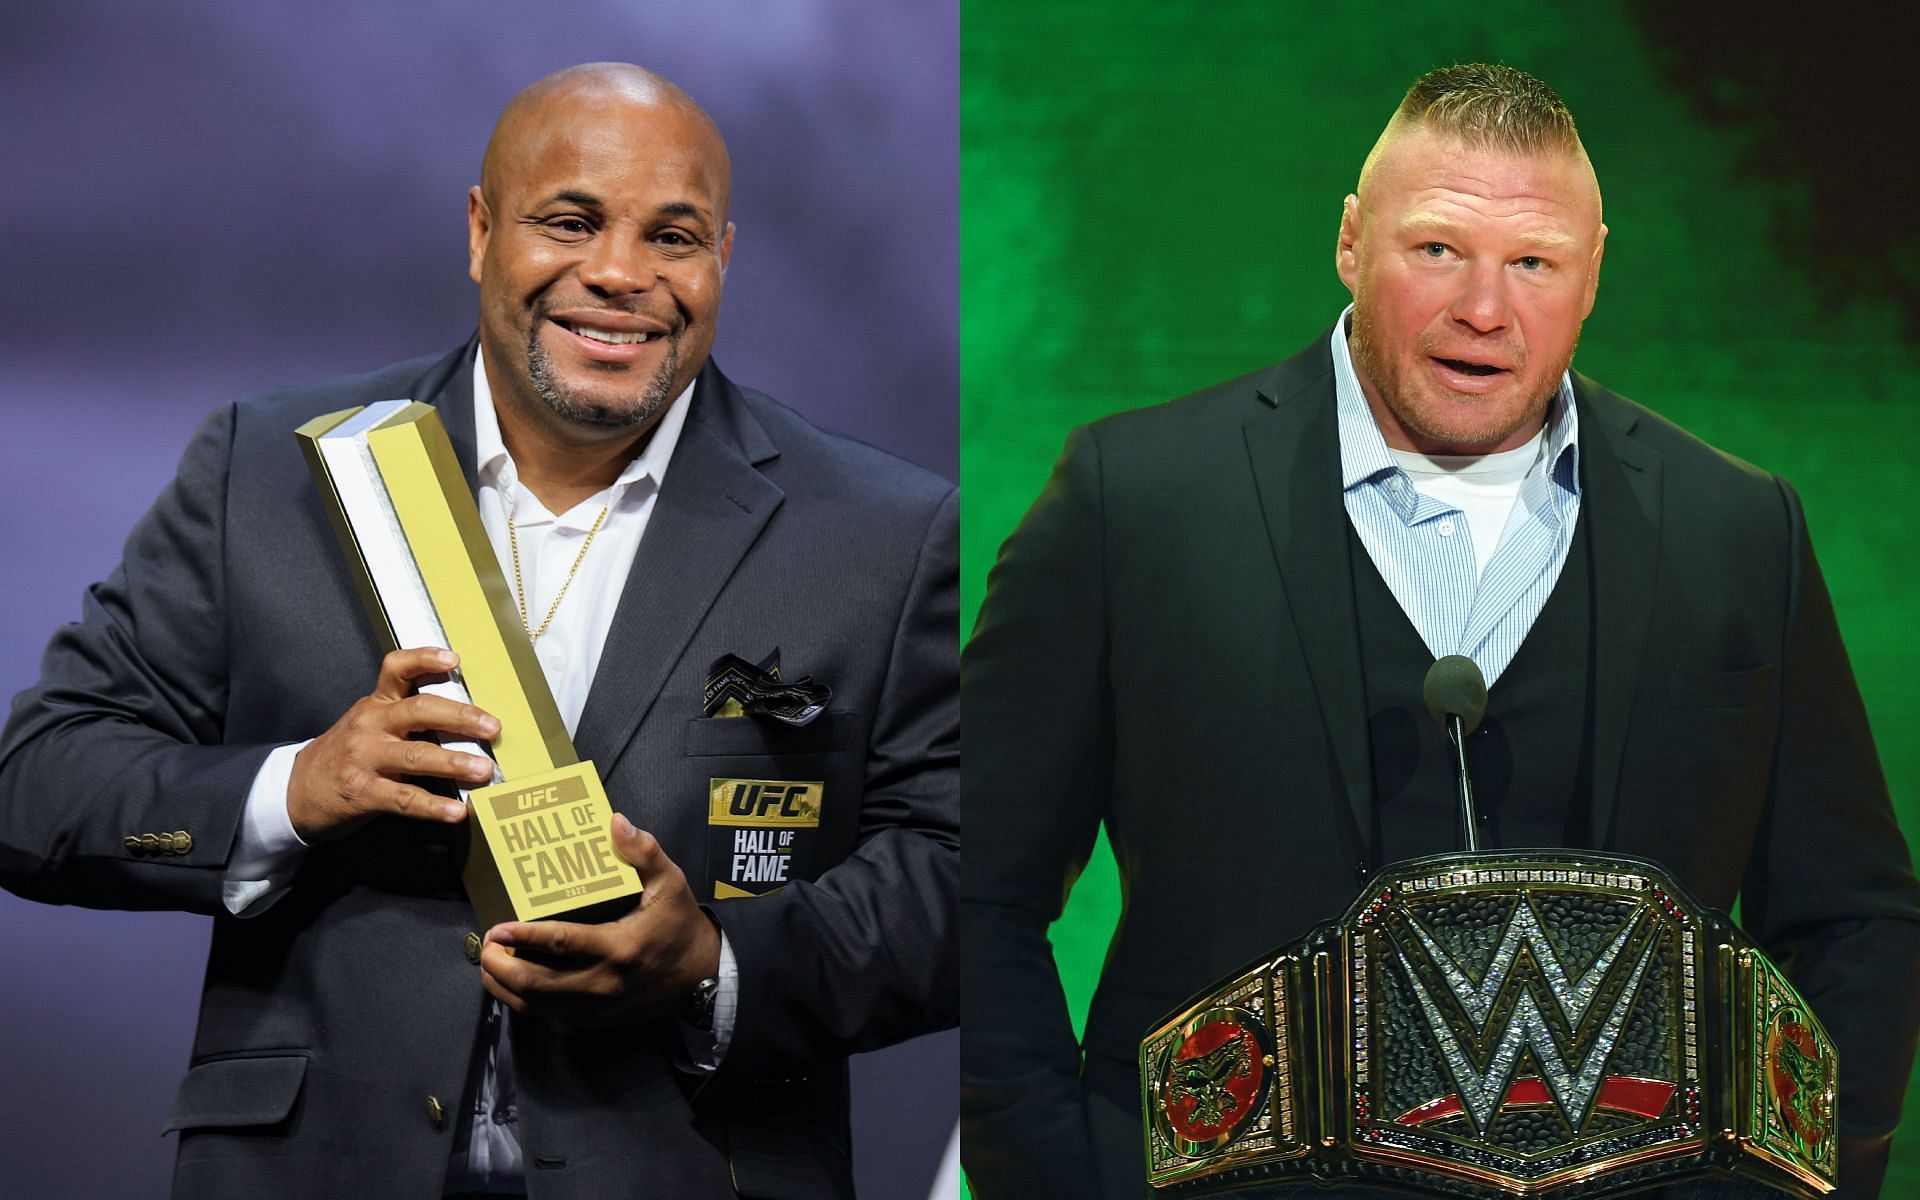 Daniel Cormier (left) and Brock Lesnar (right) [Image credits: Getty Images] 